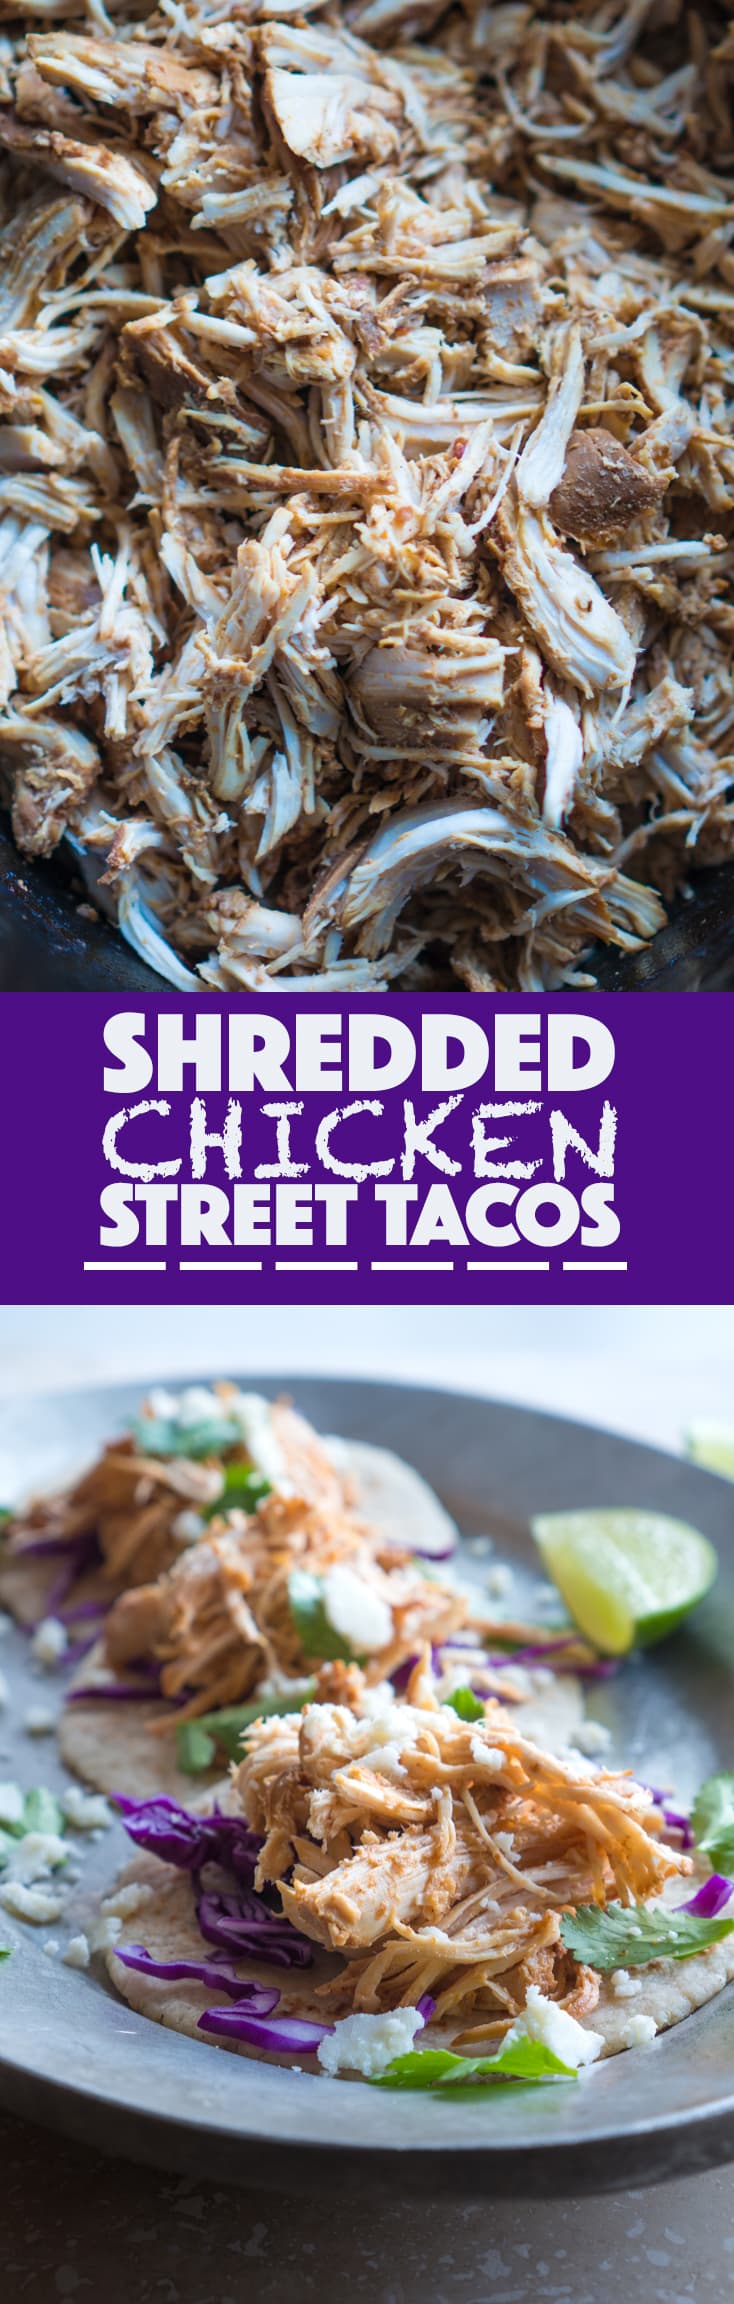 Shredded Chicken Street Tacos – We love this gluten-free recipe for Shredded Chicken Street Tacos! It is so simple to throw together as a weeknight dinner or for a big get-together. Put your slow cooker to work to turn lean, protein-packed chicken breasts into these tasty little tacos. Top them with fresh cilantro, crumbled cotija cheese, crunchy cabbage slaw, spicy salsa, creamy guacamole, or a squeeze of lime juice. Deck them out however you please! ♥ | freeyourfork.com